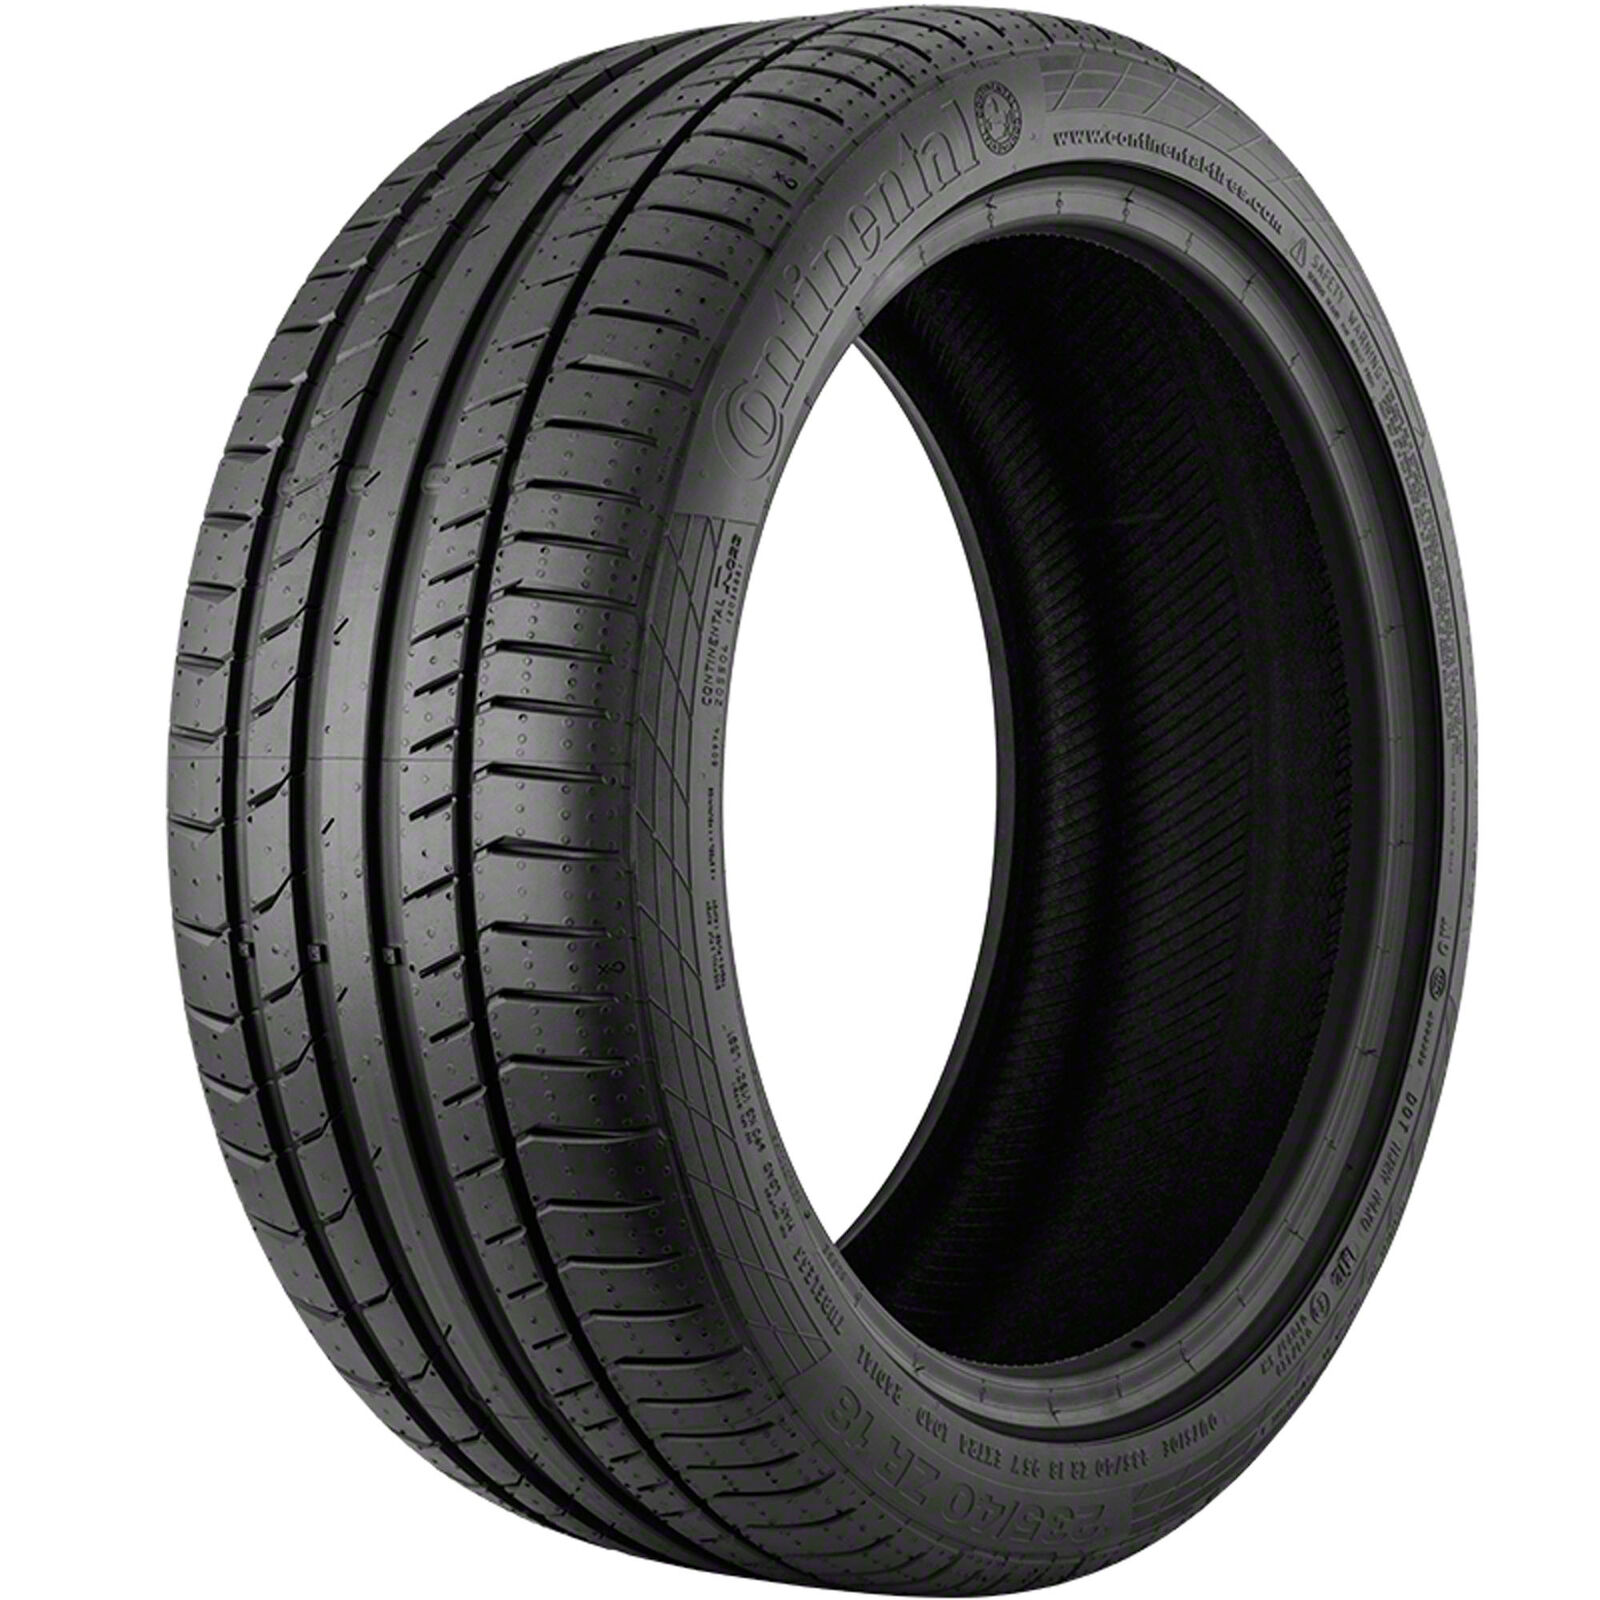 2 New Continental Contisportcontact 5p  - 265/35zr21 Tires 2653521 265 35 21